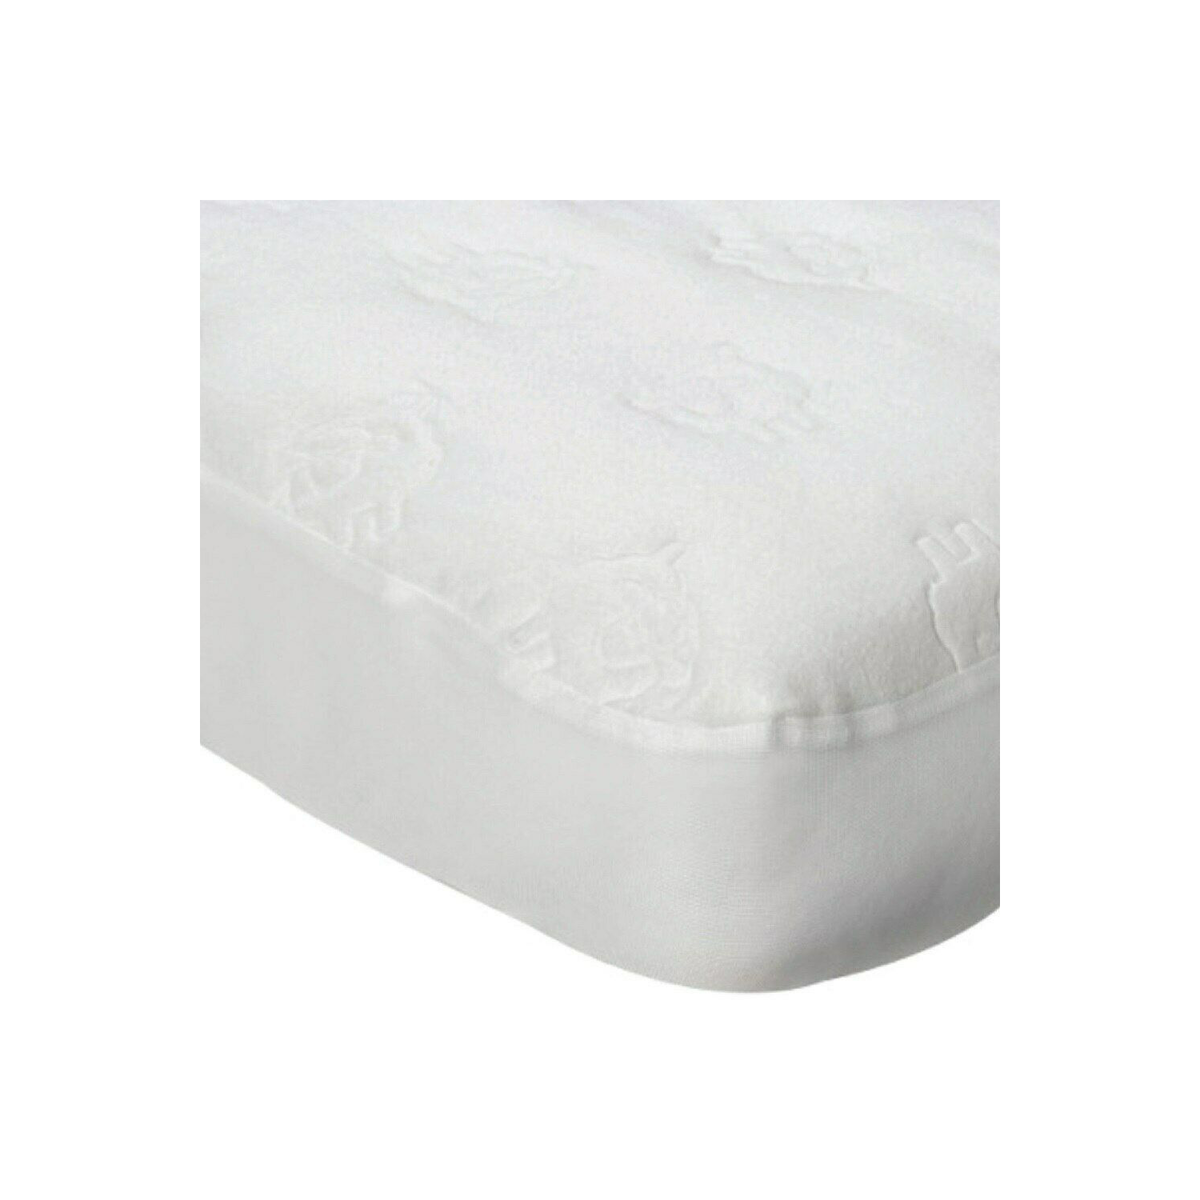 Playette Playette Travel Embossed Mattress  Protector - White